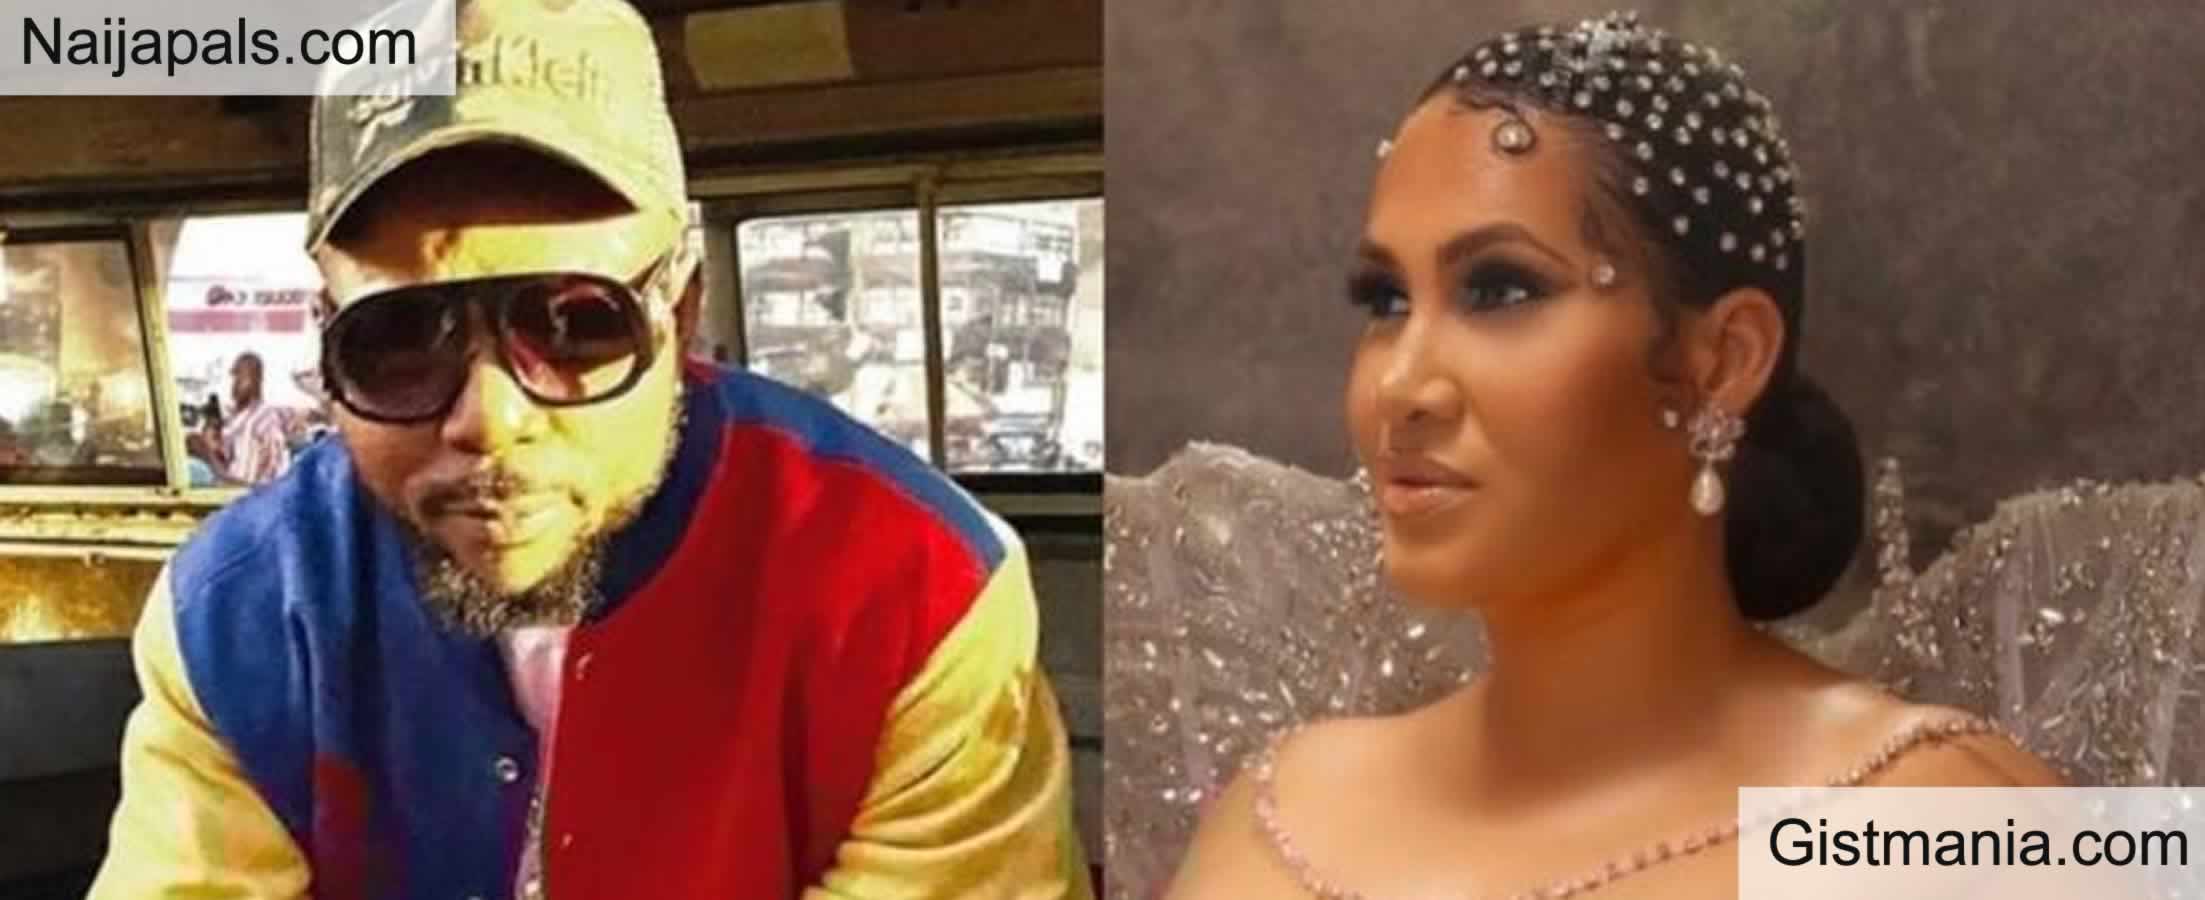 Caroline Danjuma Demands Marriage Proof To Tagbo From Oritsefemi Warns of Impending Lawsuit- <em>By Gistmania Naijapals</em>